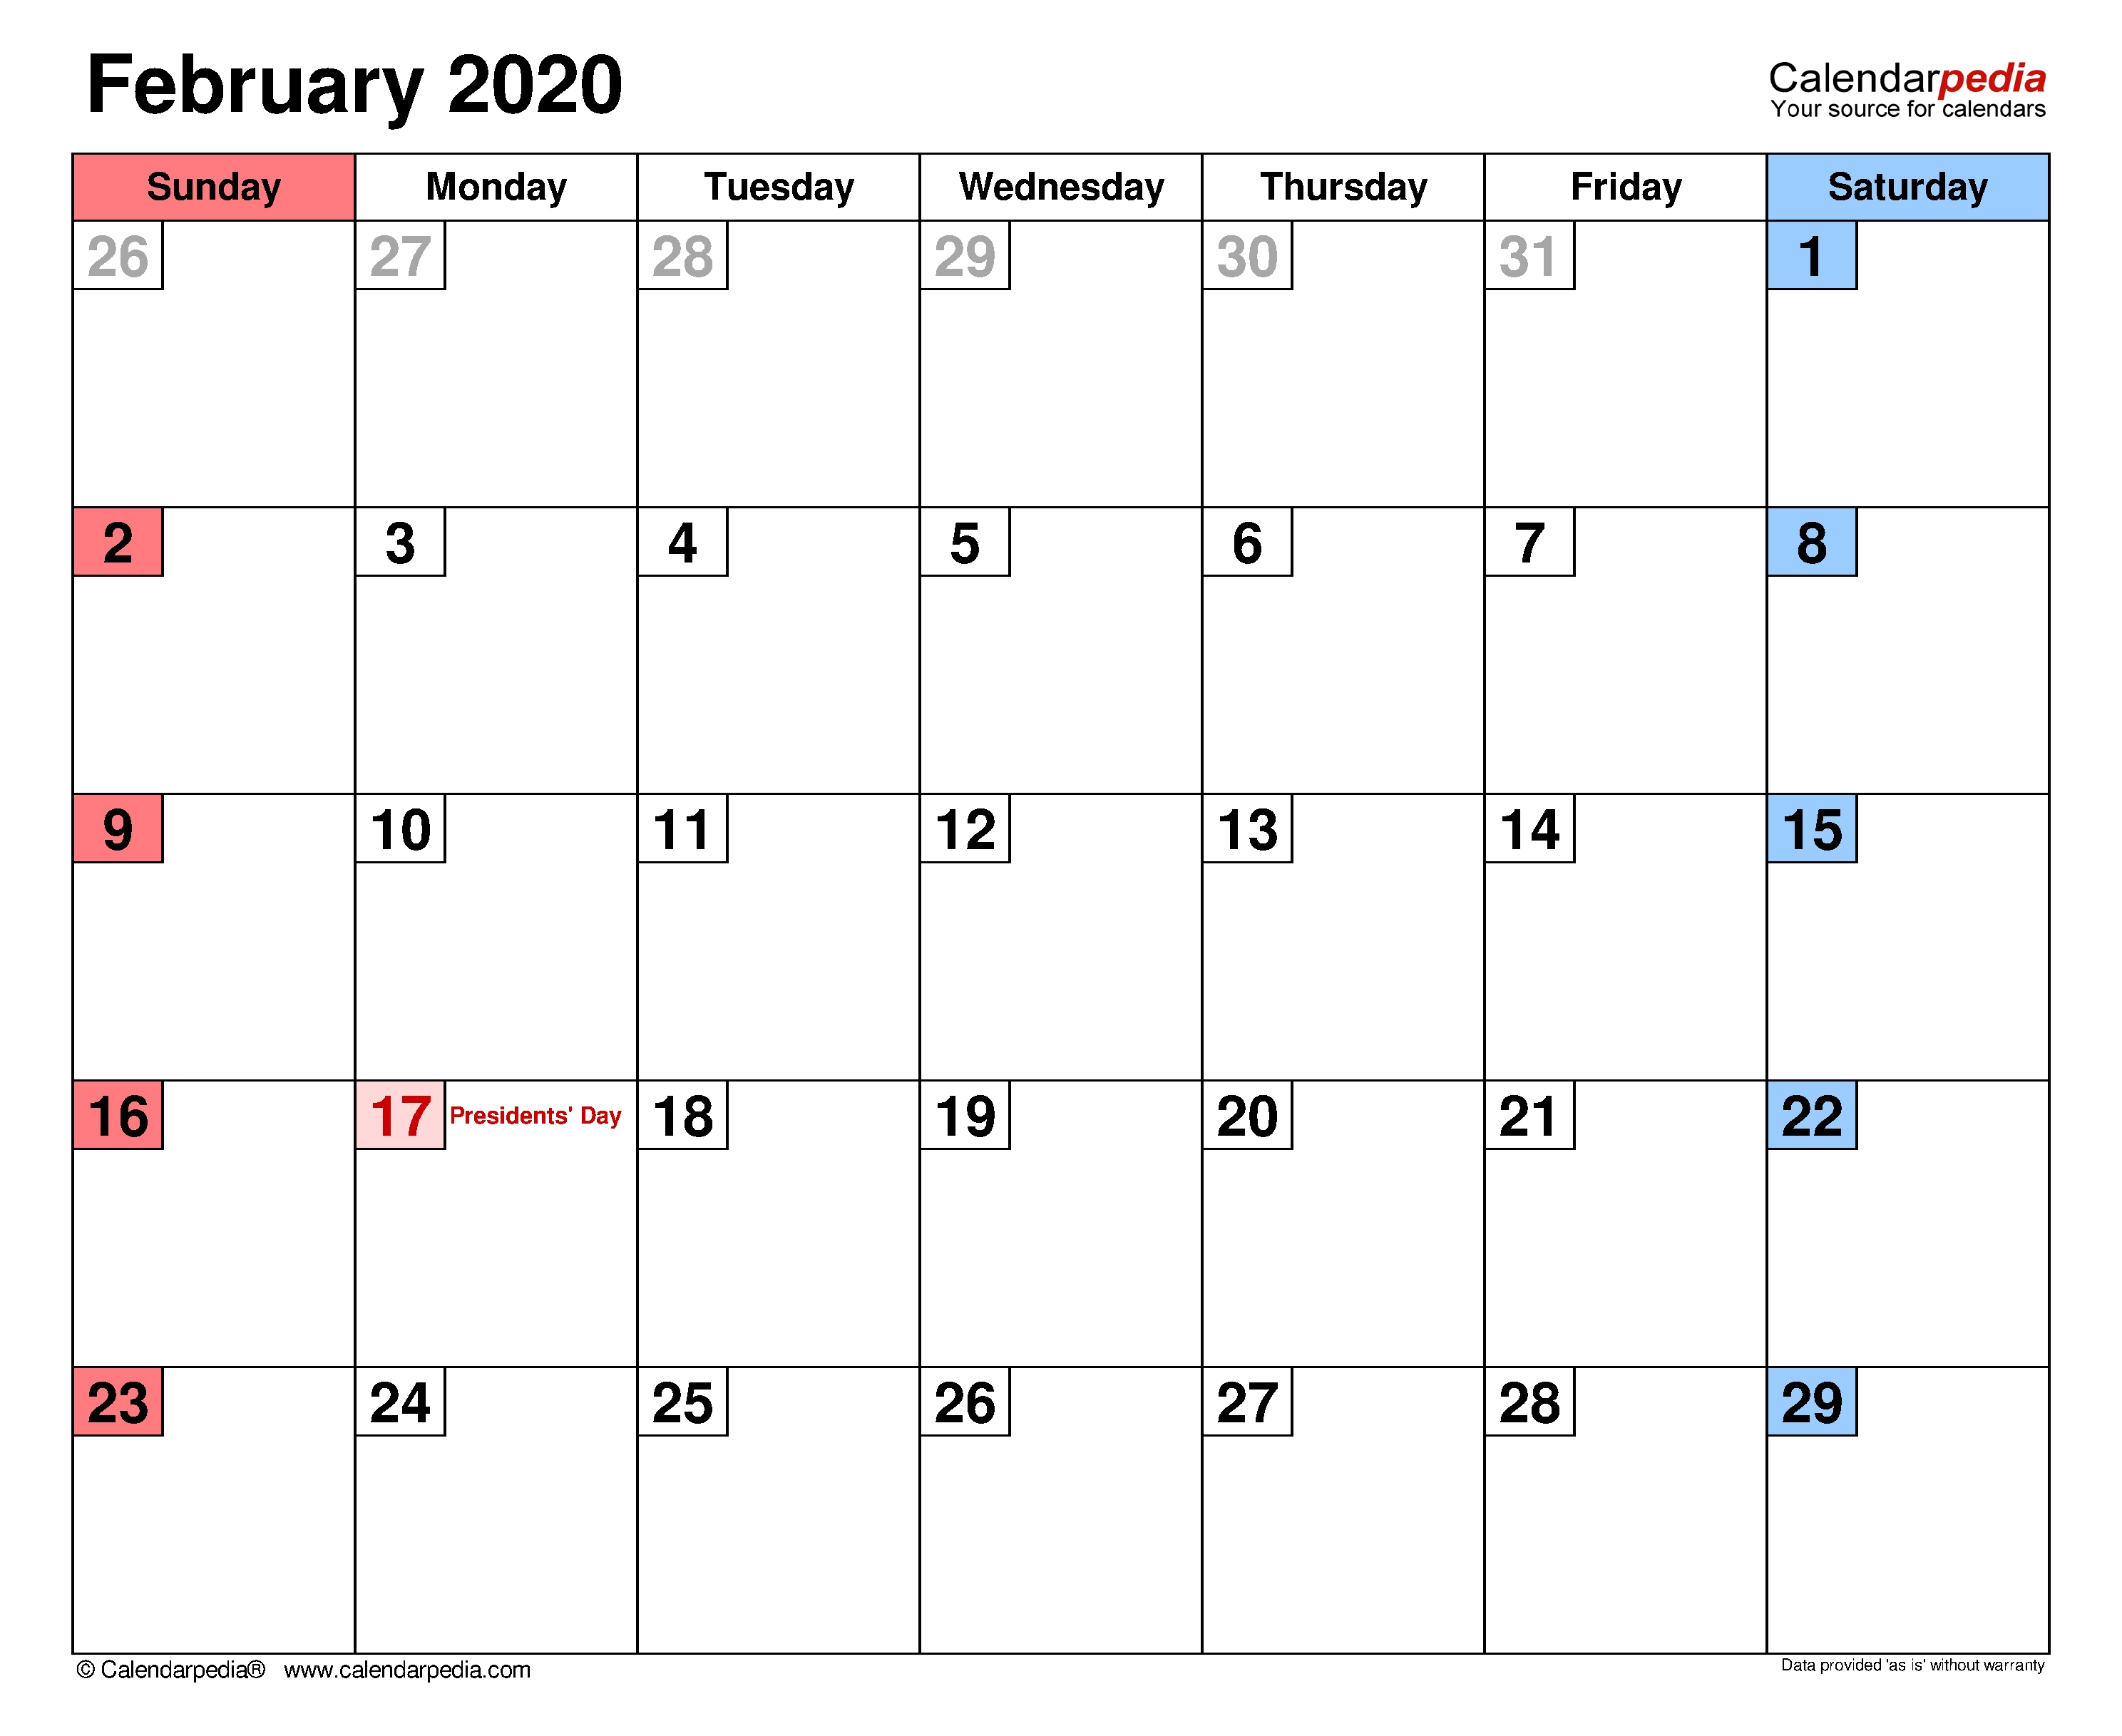 February 2020 - Calendar Templates For Word, Excel And Pdf